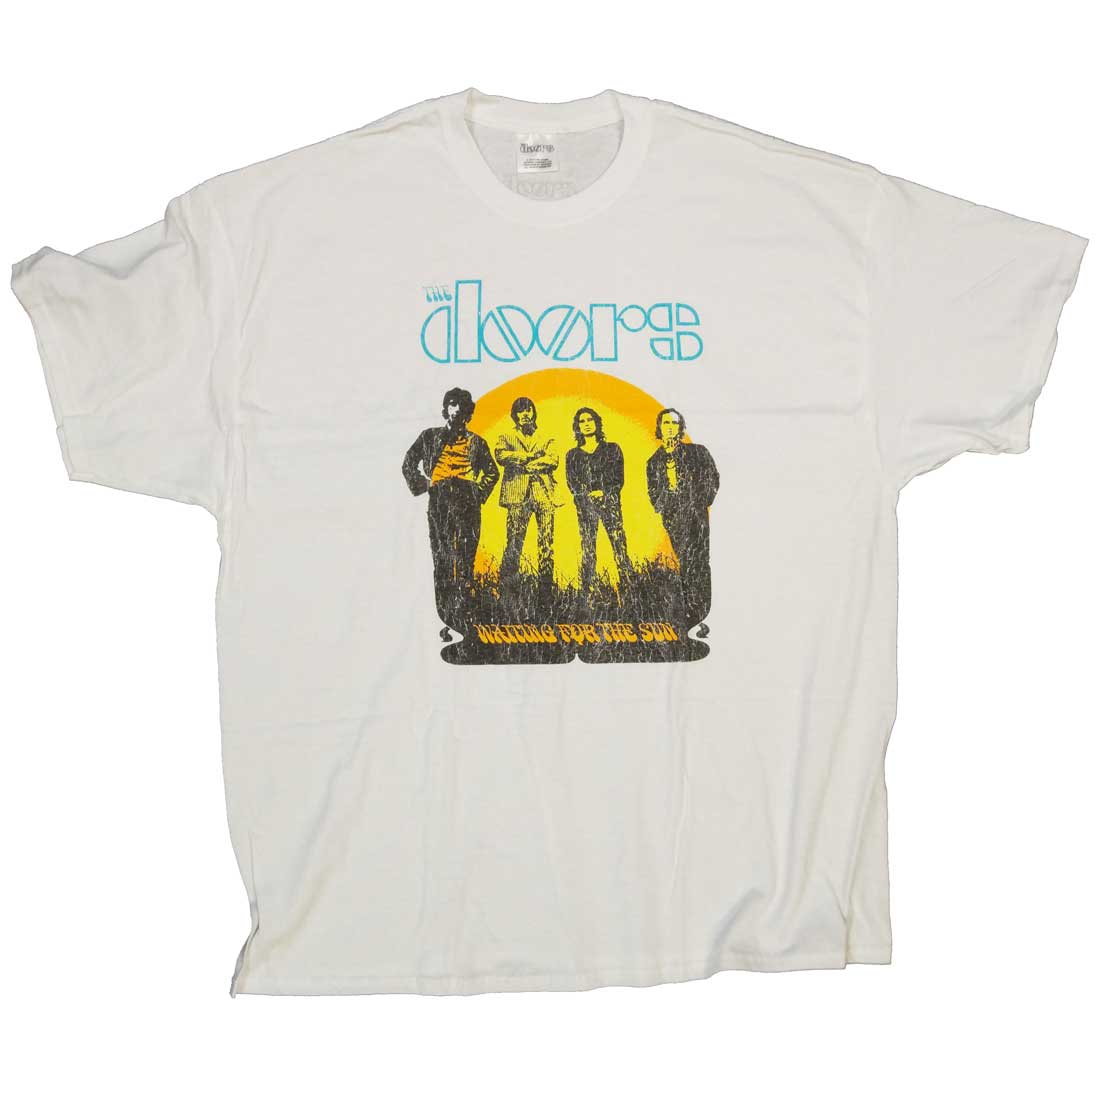 The Doors T Shirt - Waiting For The Sun White 100% Official